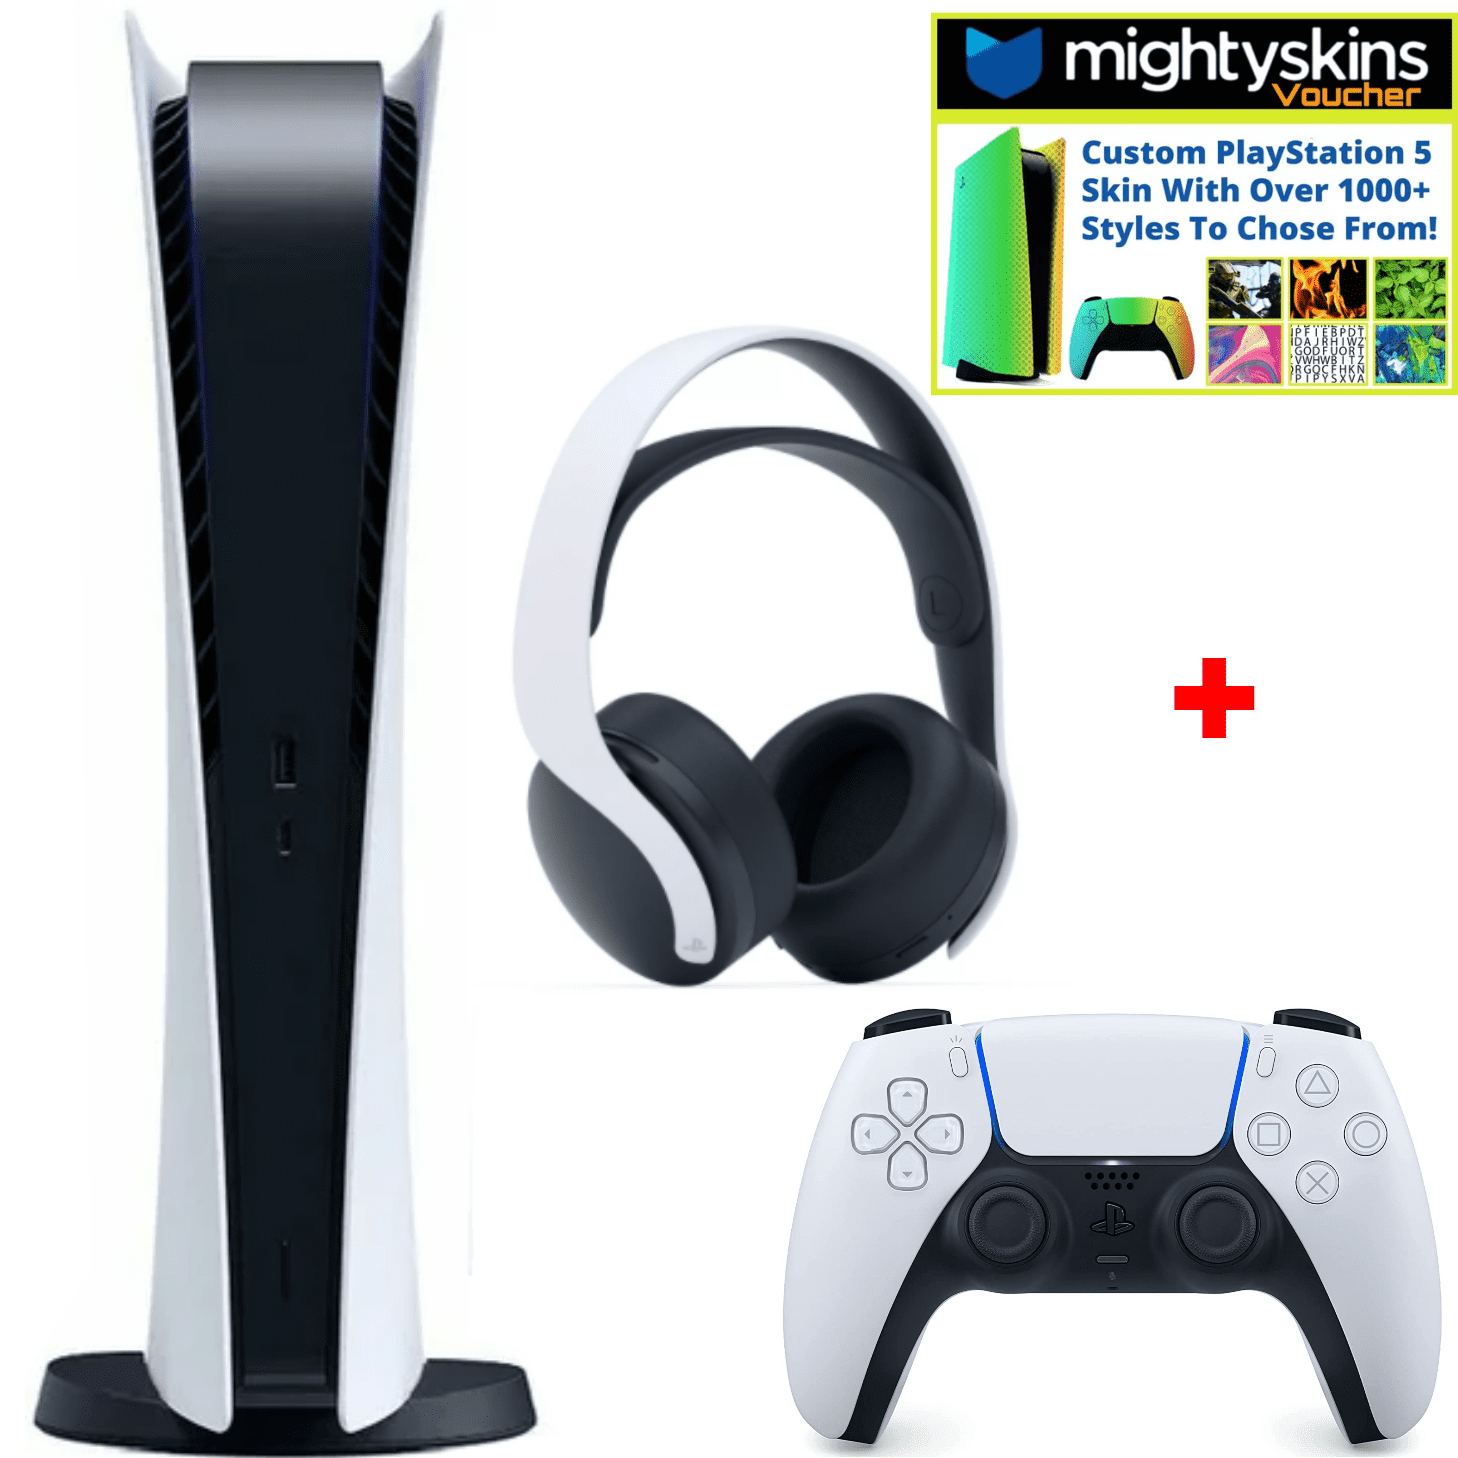 PlayStation 5 Digital Edition with PS5 Pulse 3D Headset & Mightyskins  Voucher Limited Bundle